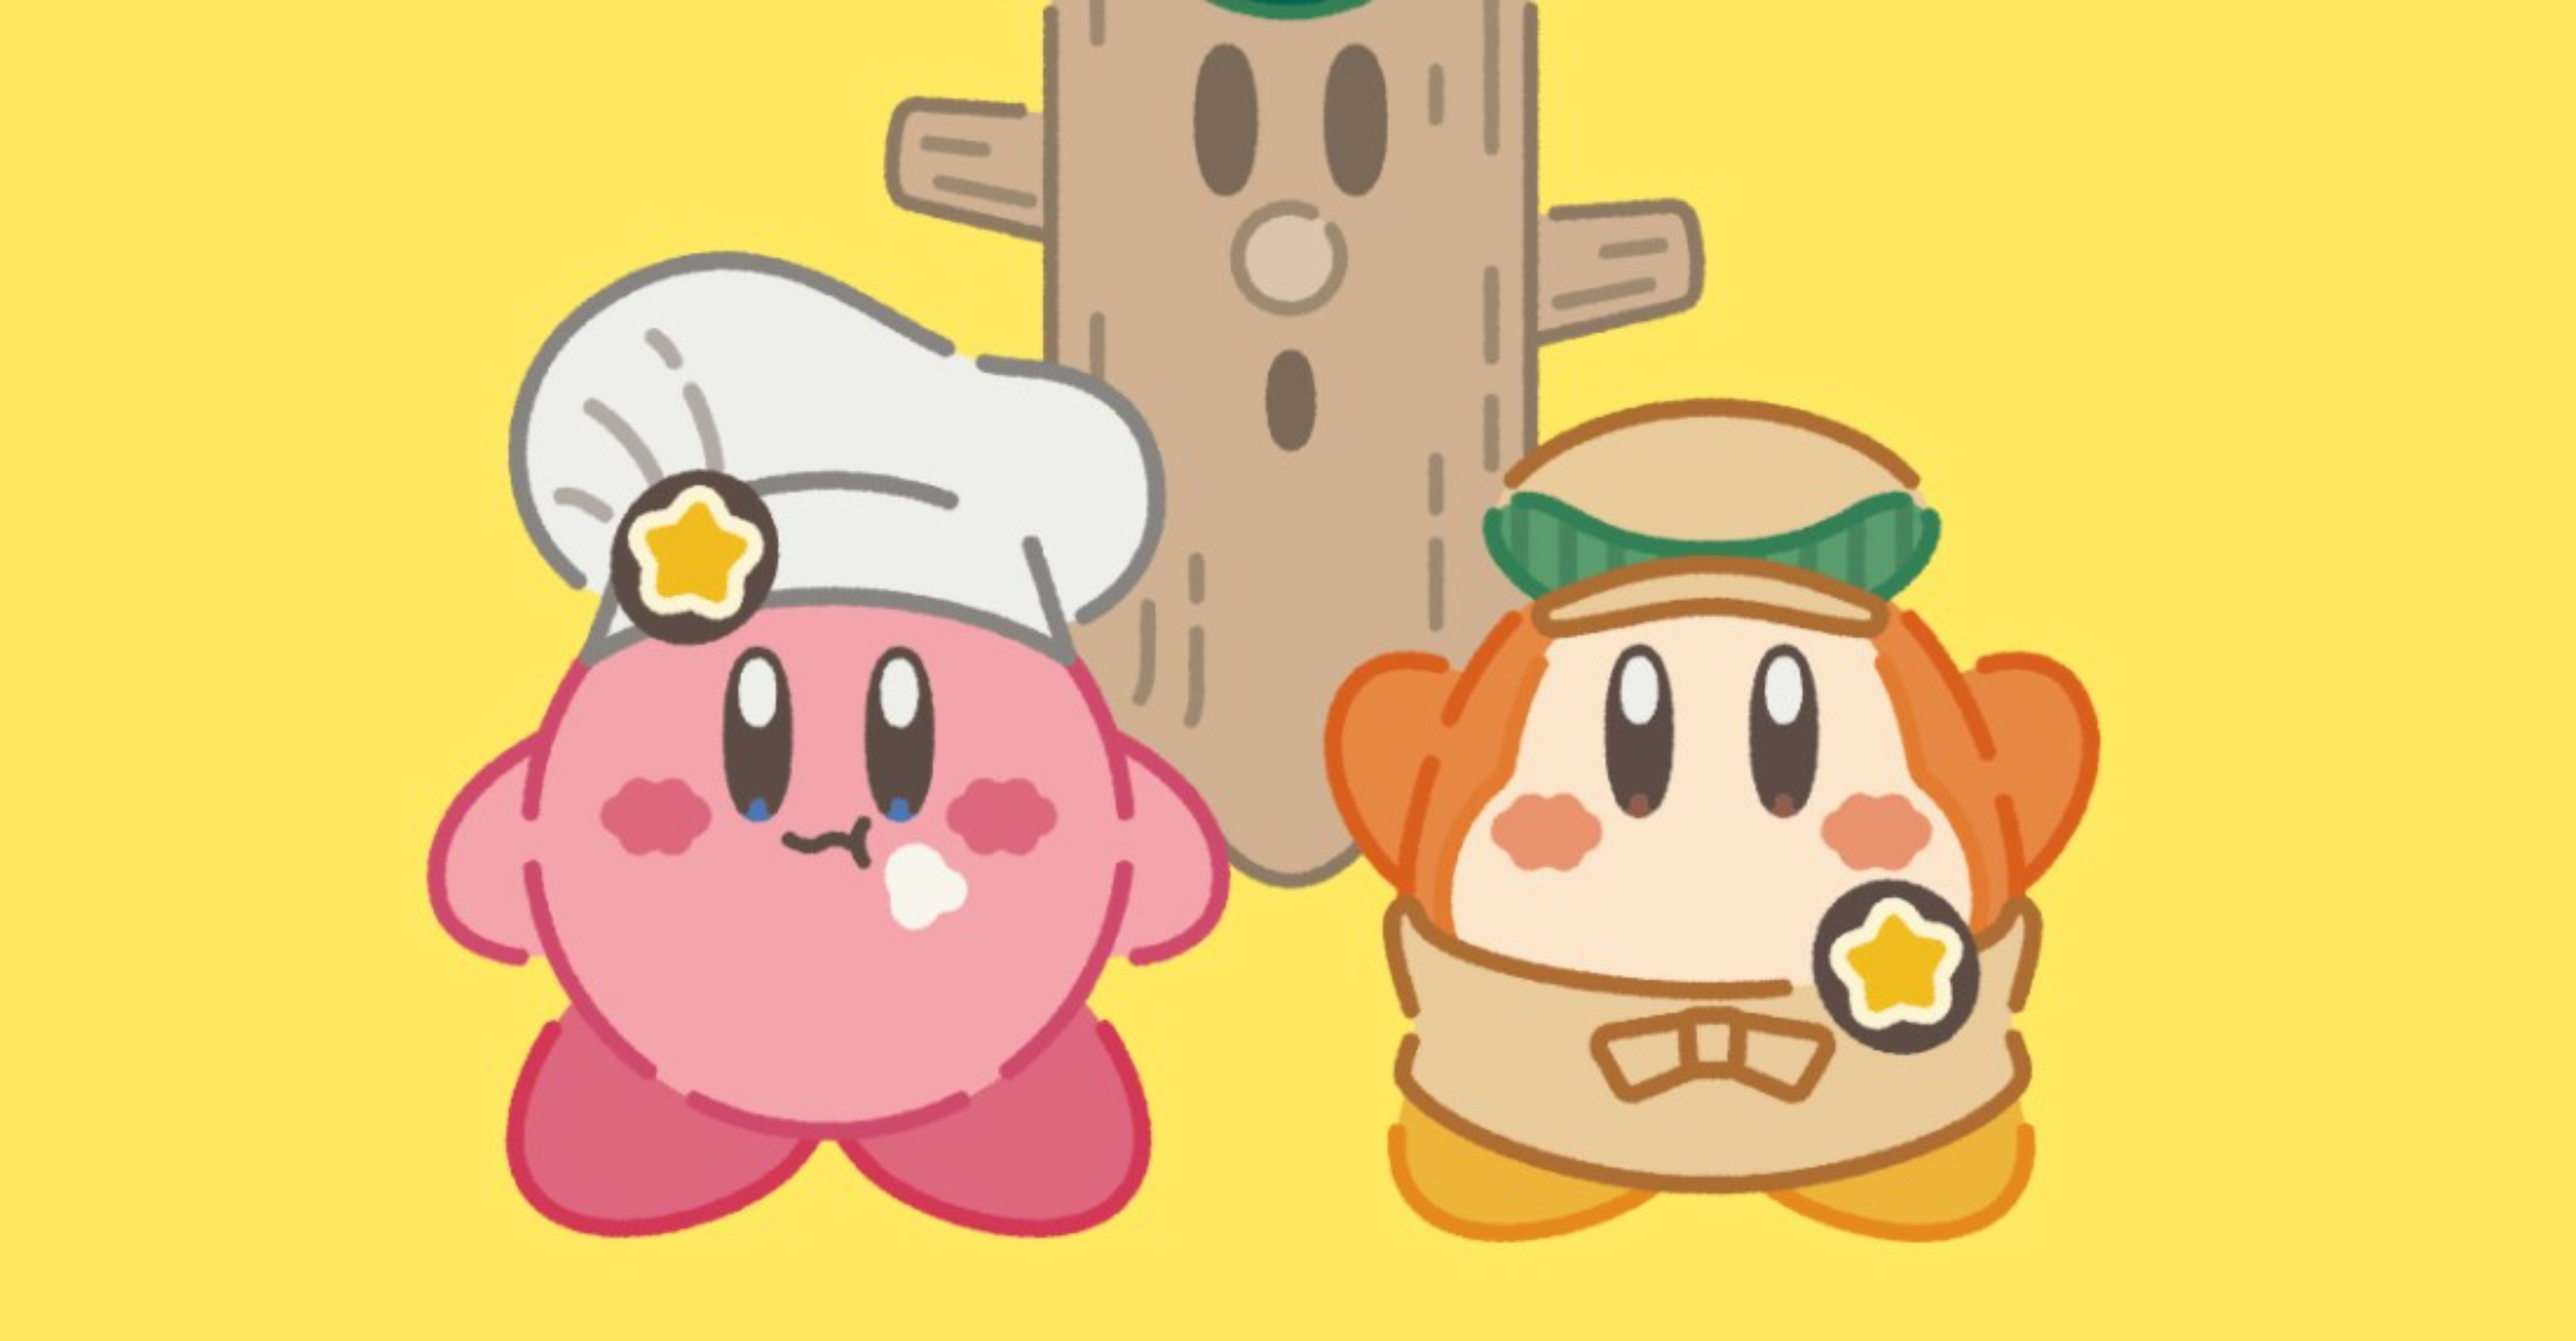 Image for Kirby Café is launching new menu and merch for Kirby’s 30th anniversary